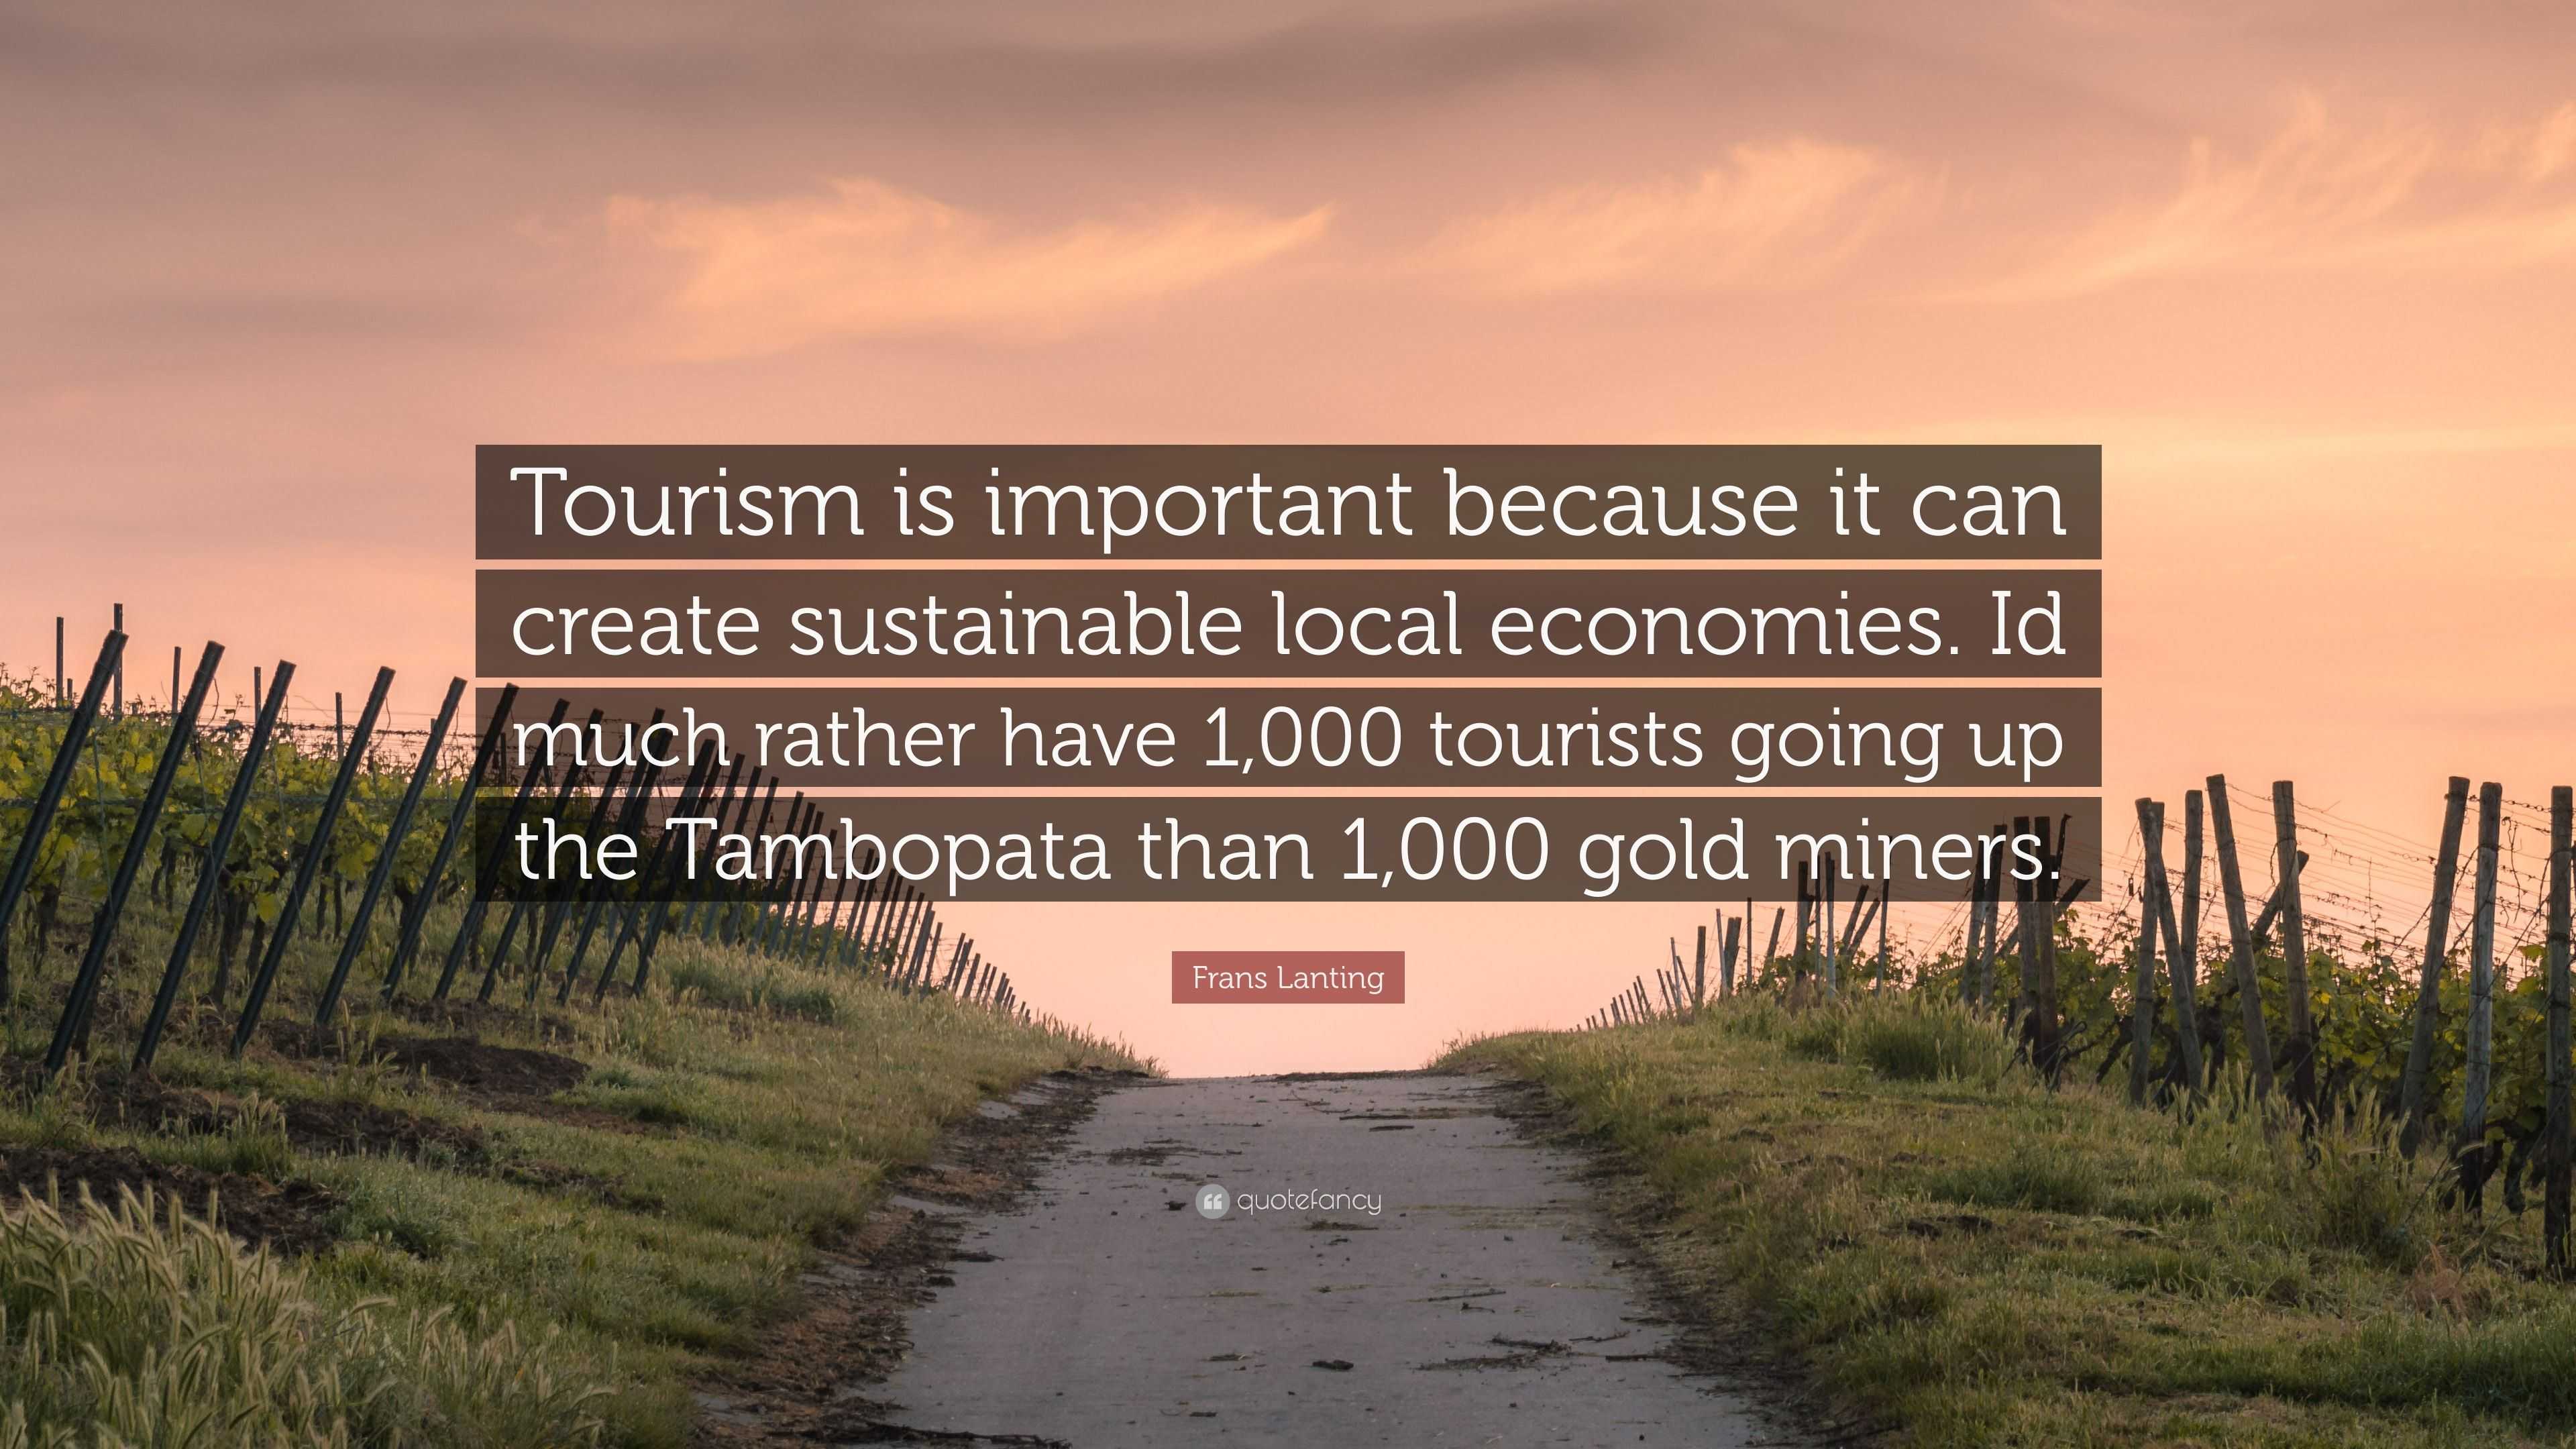 tourism can be very good for